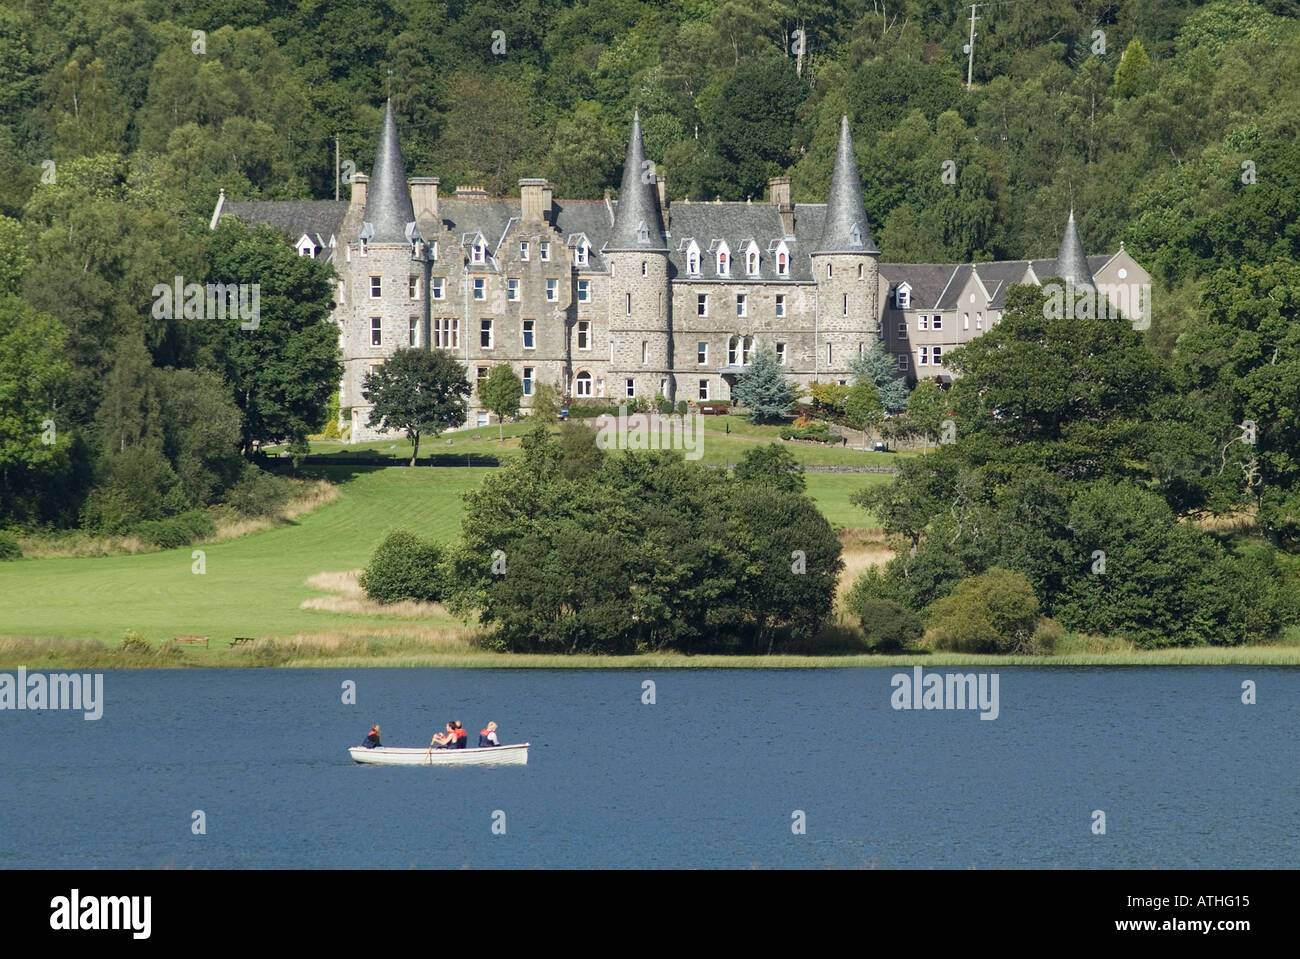 dh Loch Achray Hotel LOCH ACHRAY STIRLINGSHIRE Queen Elizabeth Forest Park and rowing boat scotland timeshare summer holiday scottish lochside on lake Stock Photo